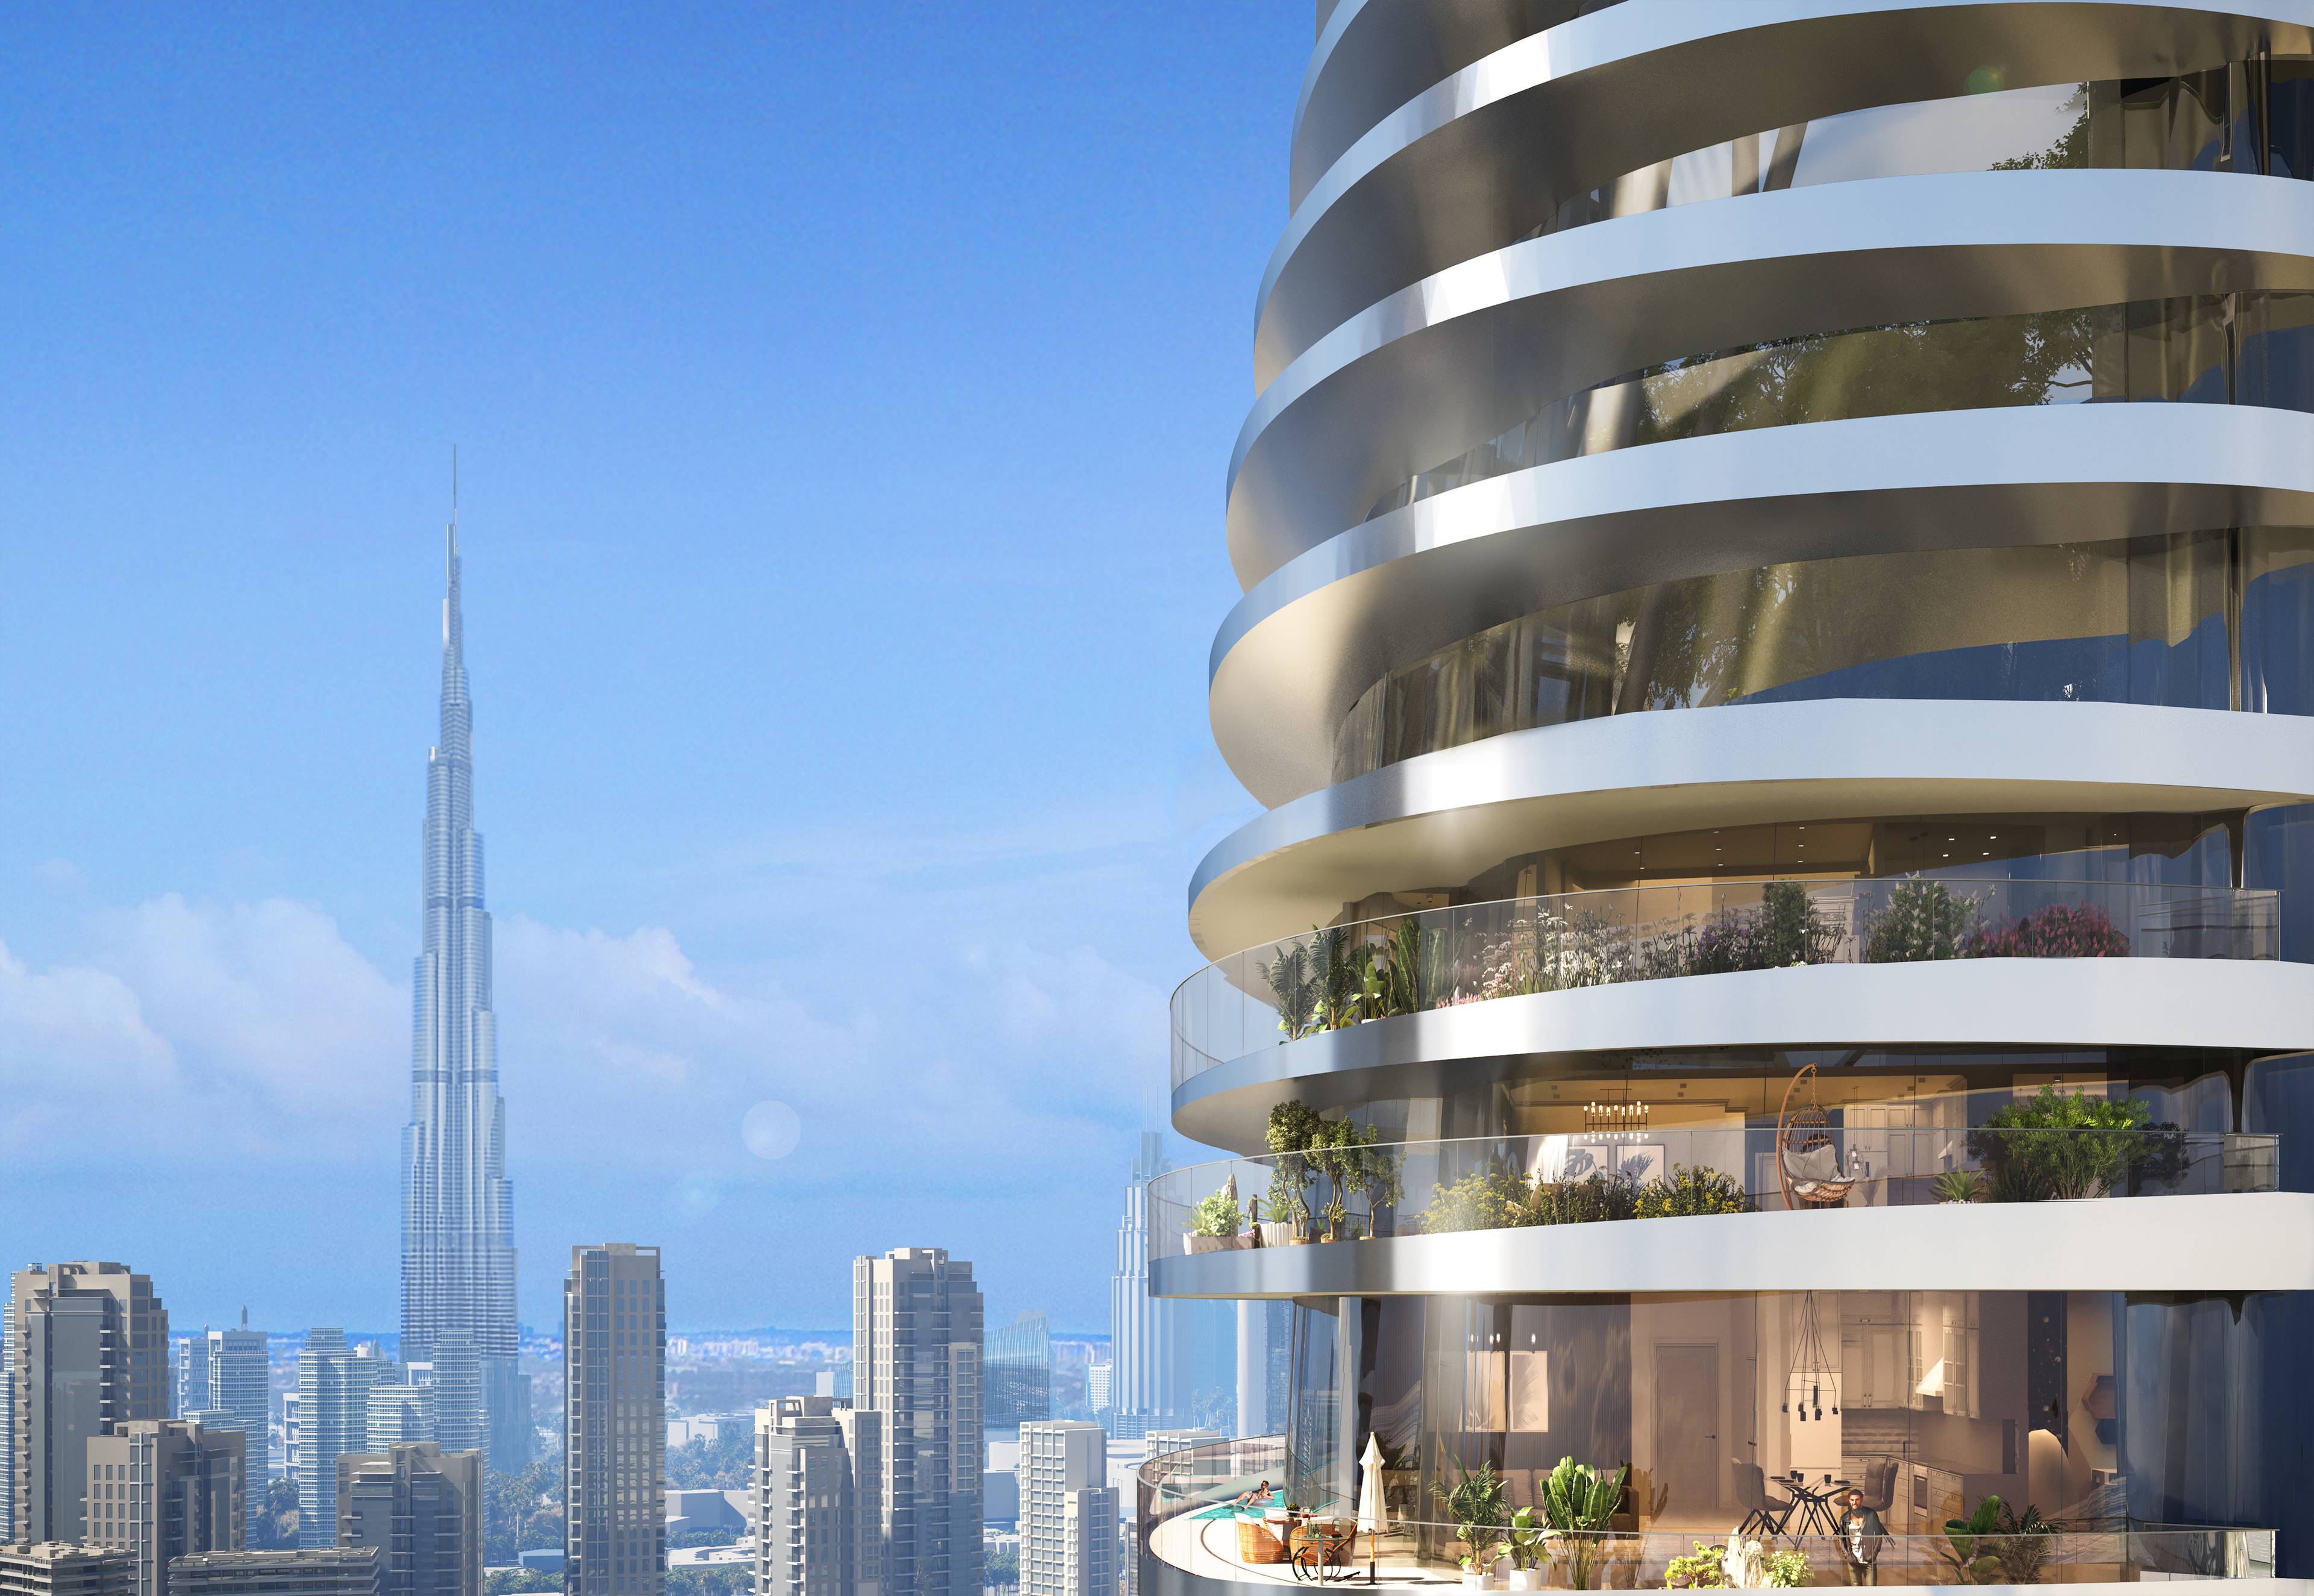 INDULGE IN LUXURY: ALTITUDE RESIDENCES, YOUR ULTIMATE DESTINATION IN DUBAI - 3BR, SPRAWLING 2000+ SQ FT WITH UNRIVALED AMENITIES